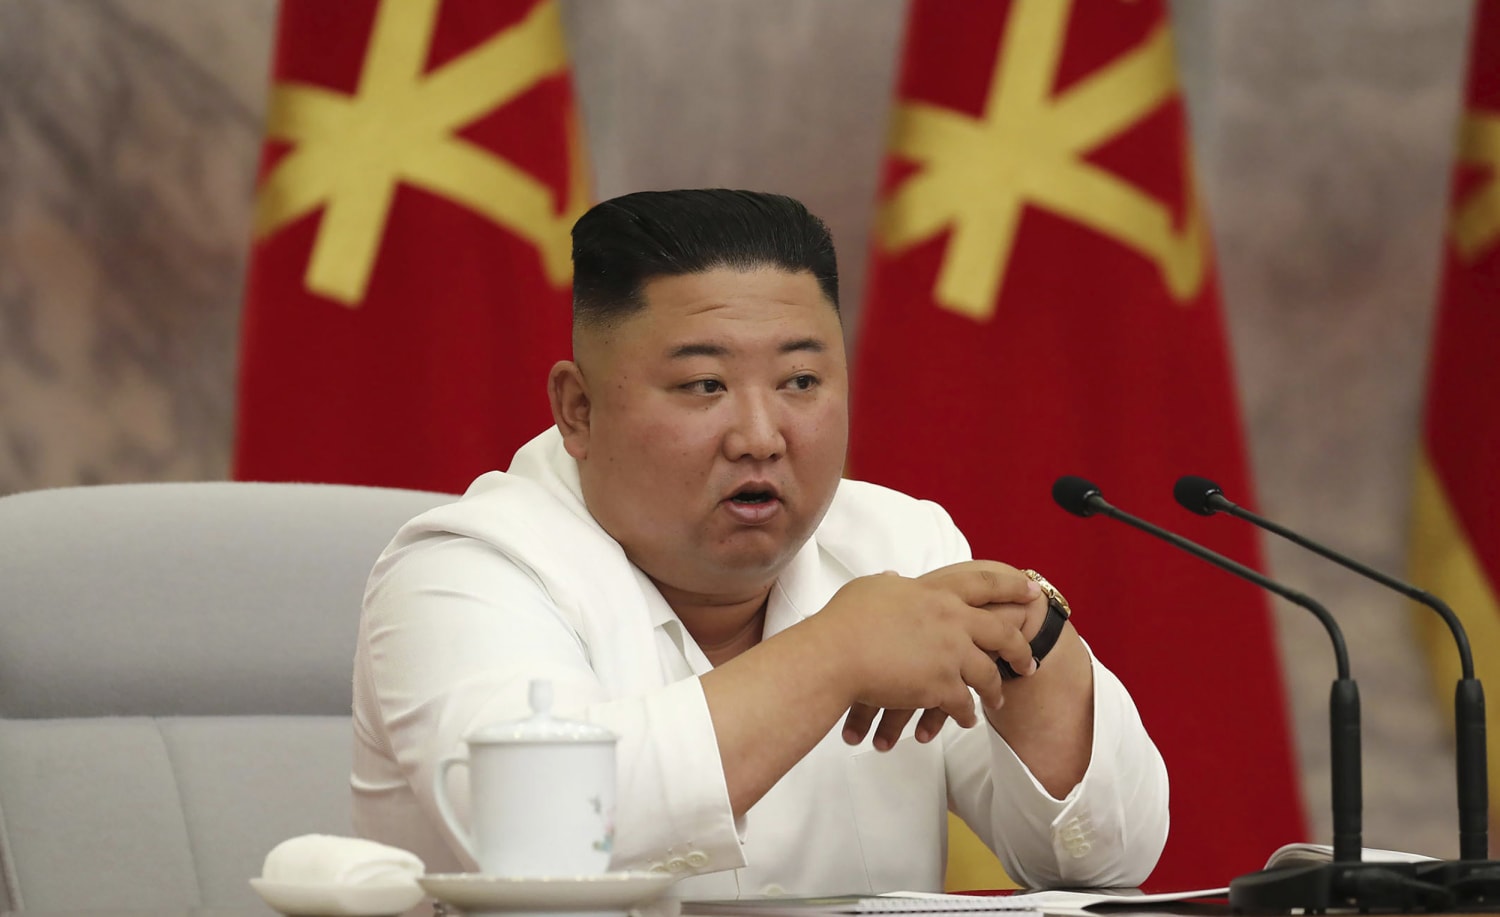 North Korea S Kim Jong Un Has Lost Weight But Remains Healthy South Korea Says